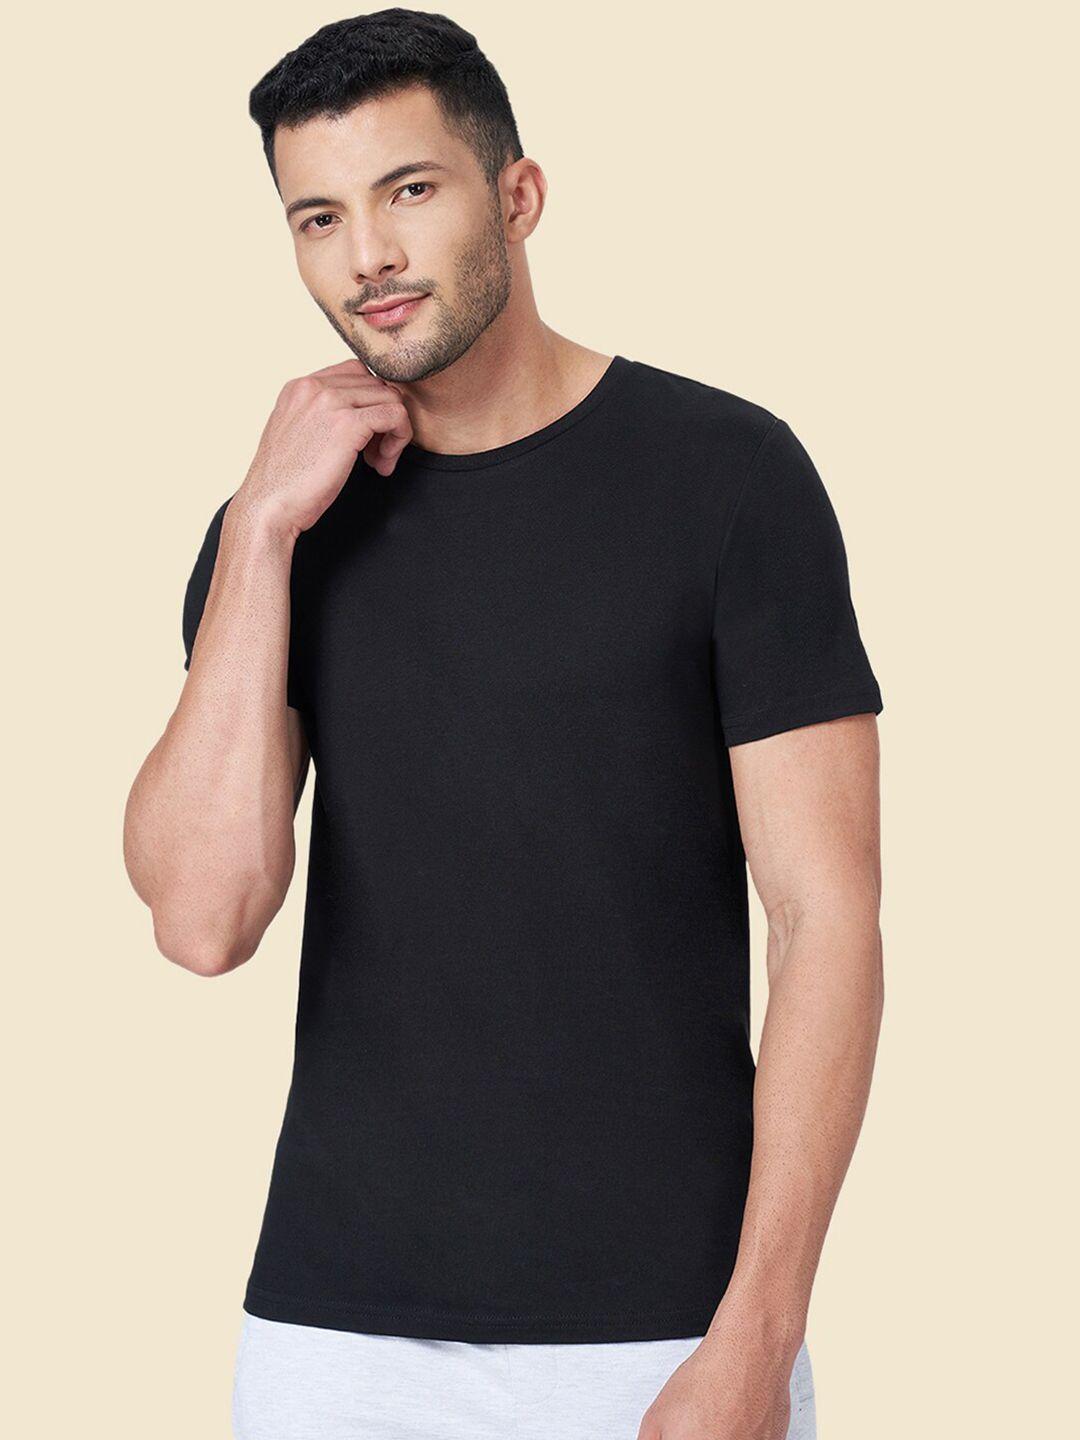 ajile by pantaloons round neck short sleeves slim fit cotton t-shirt